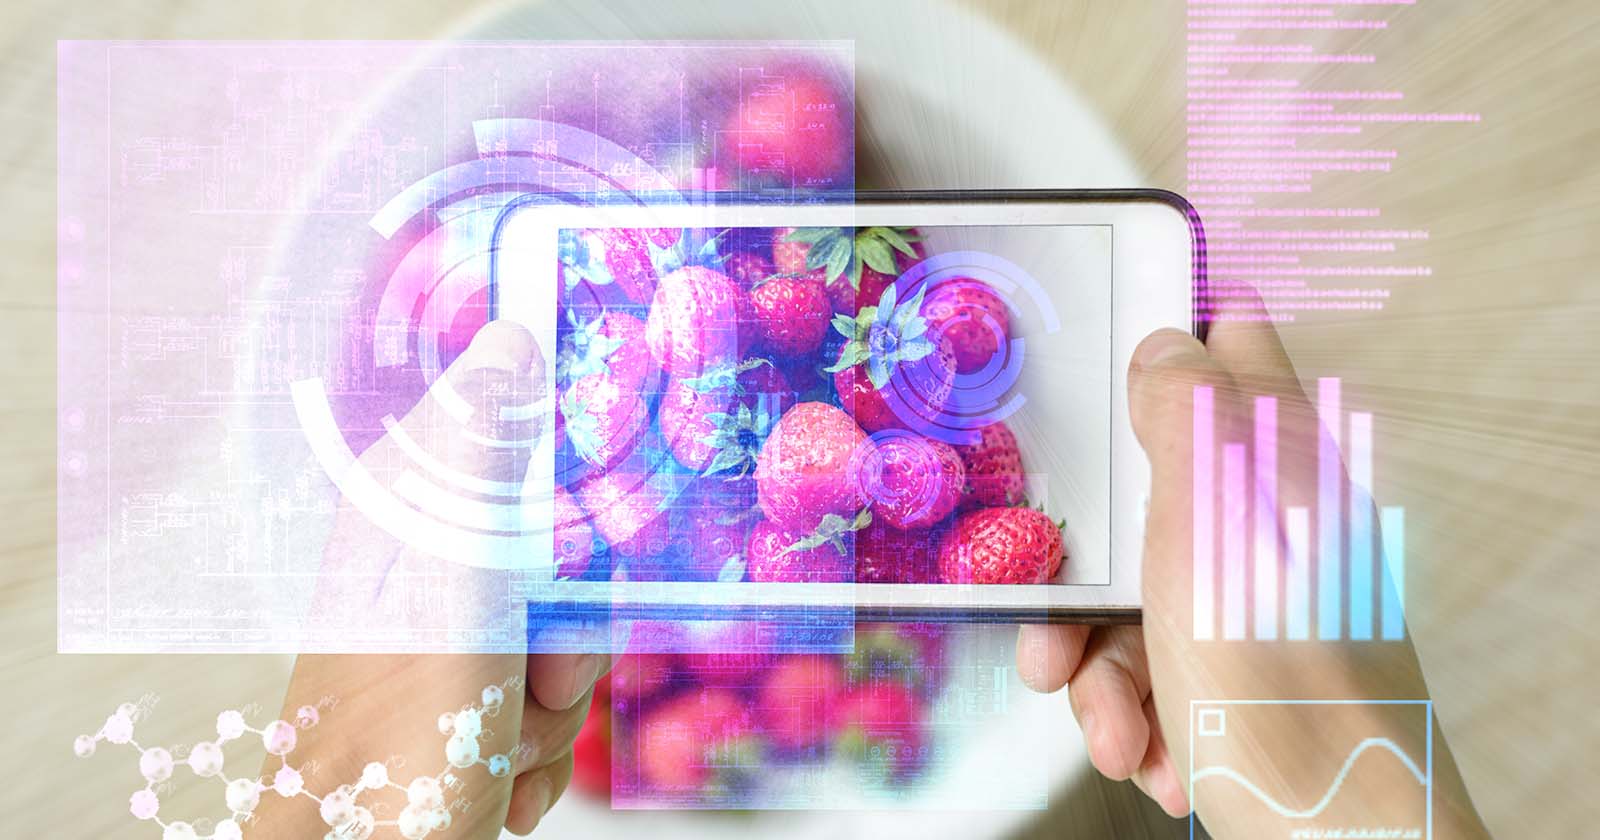 hands holding an iphone while capturing an image of strawberries and collecting data